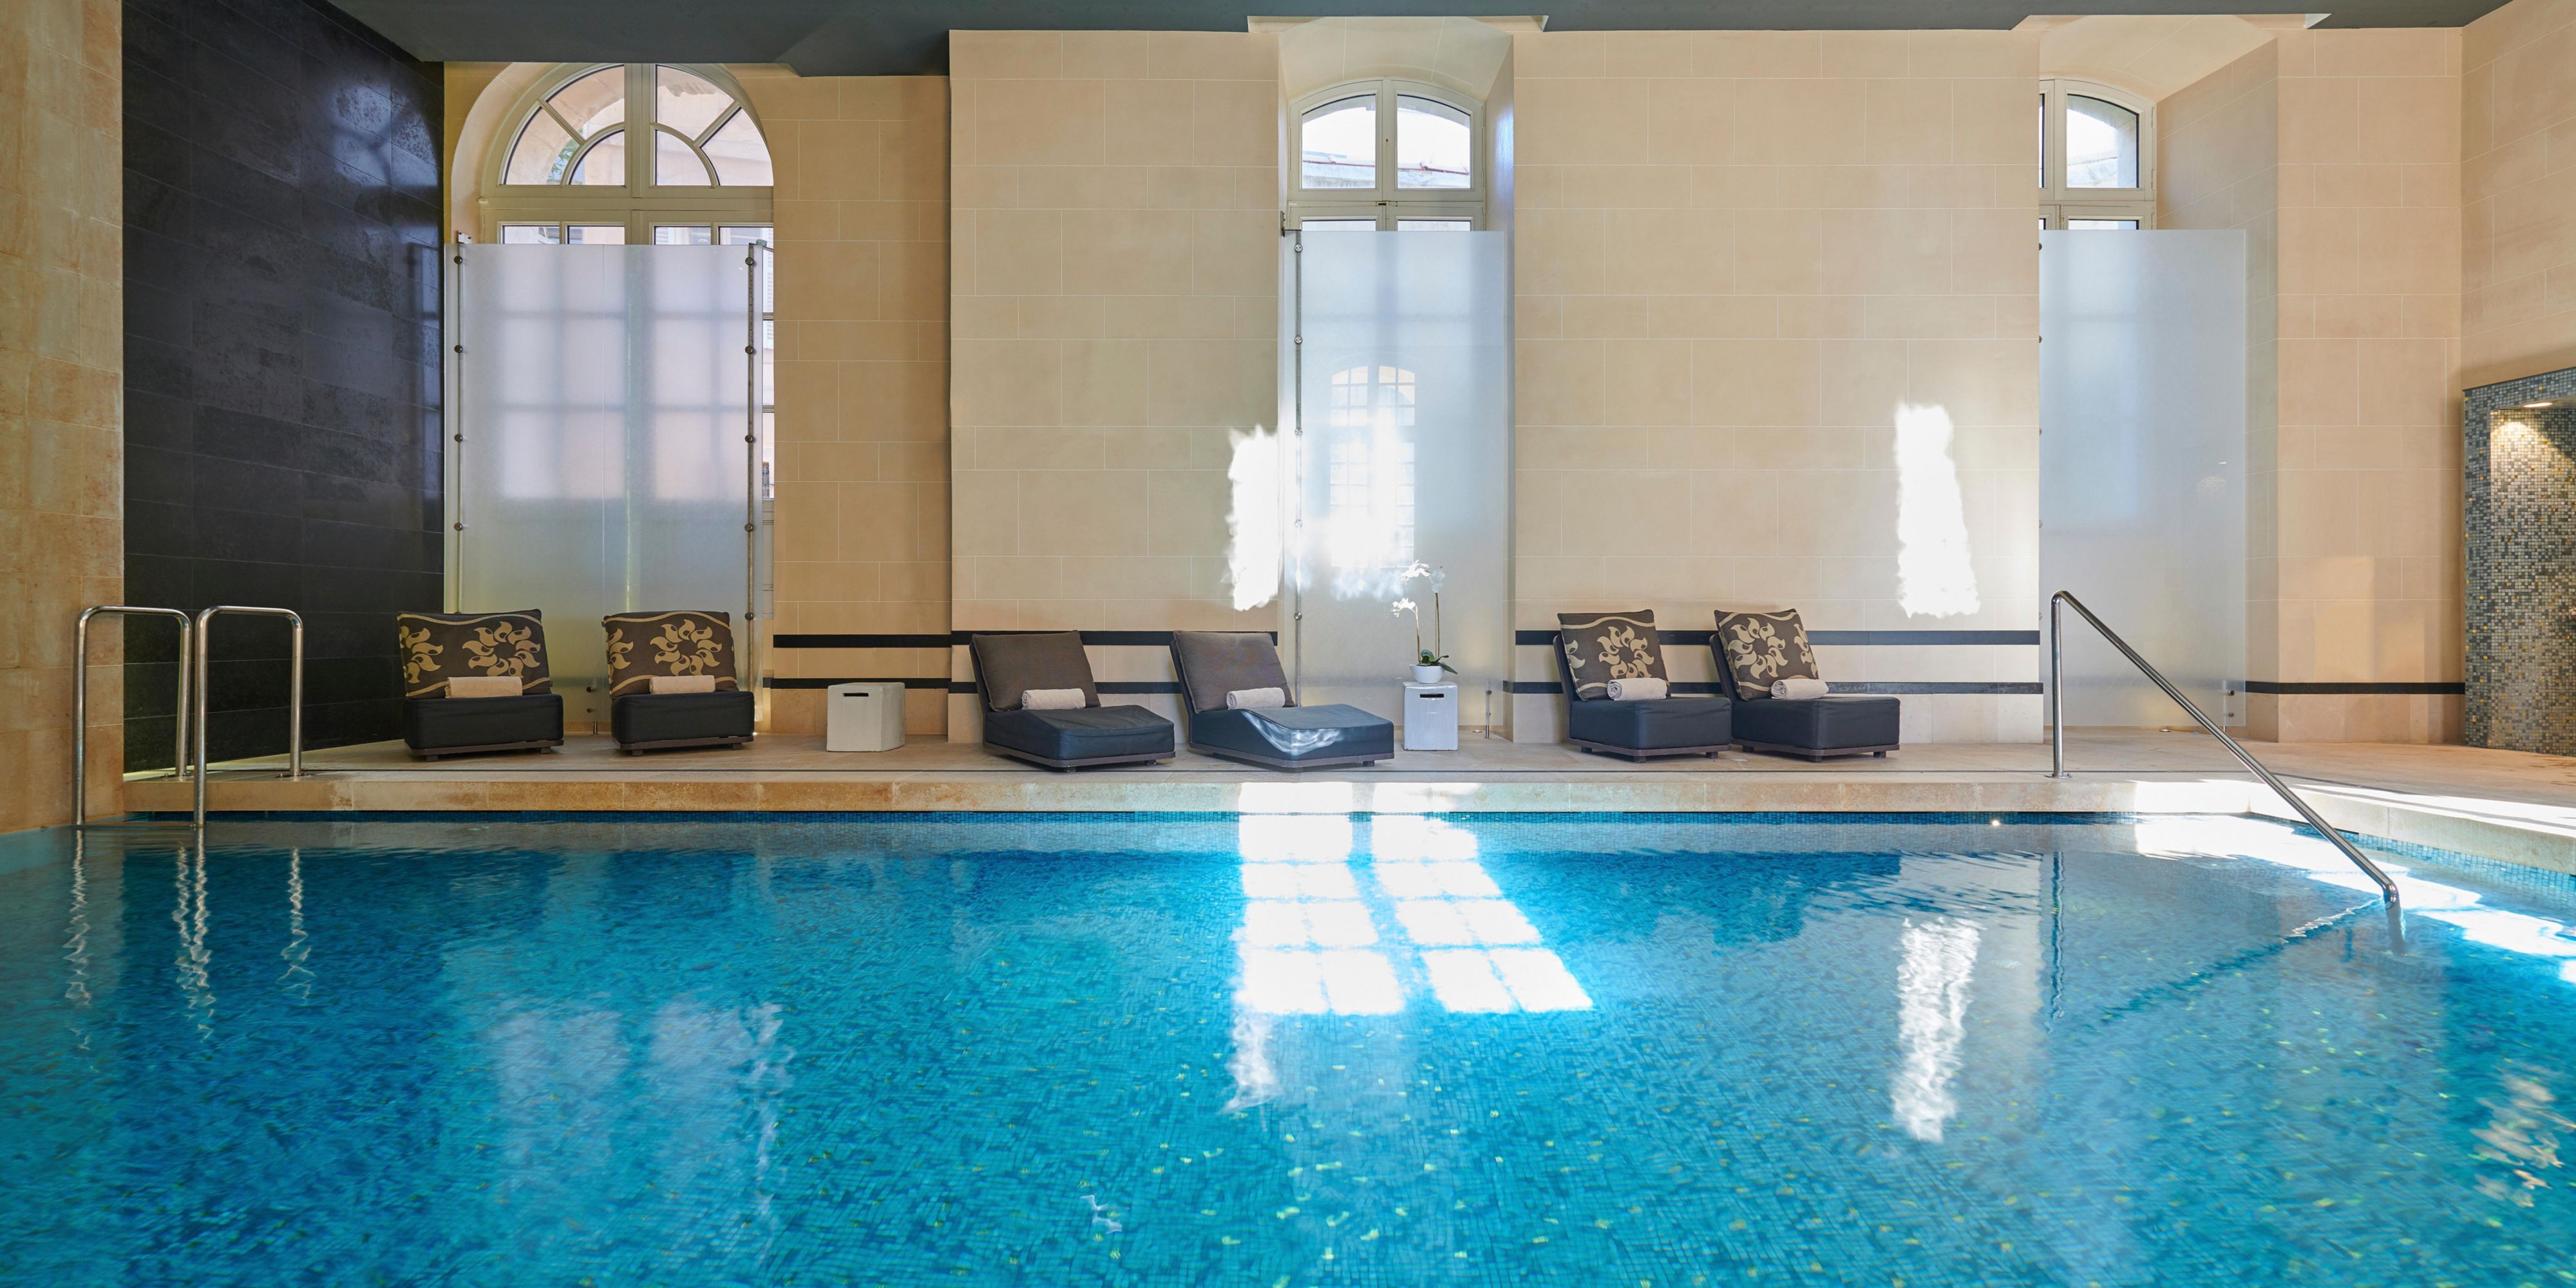 In a decor inspired by the traditional Provencal fountains and lavoirs (communal clothes’ washing places) the Spa by Clarins offers time out: a moment of sheer revitalizing relaxation in an ambience redolent of the warmth and sensuality of the Mediterranean basin.